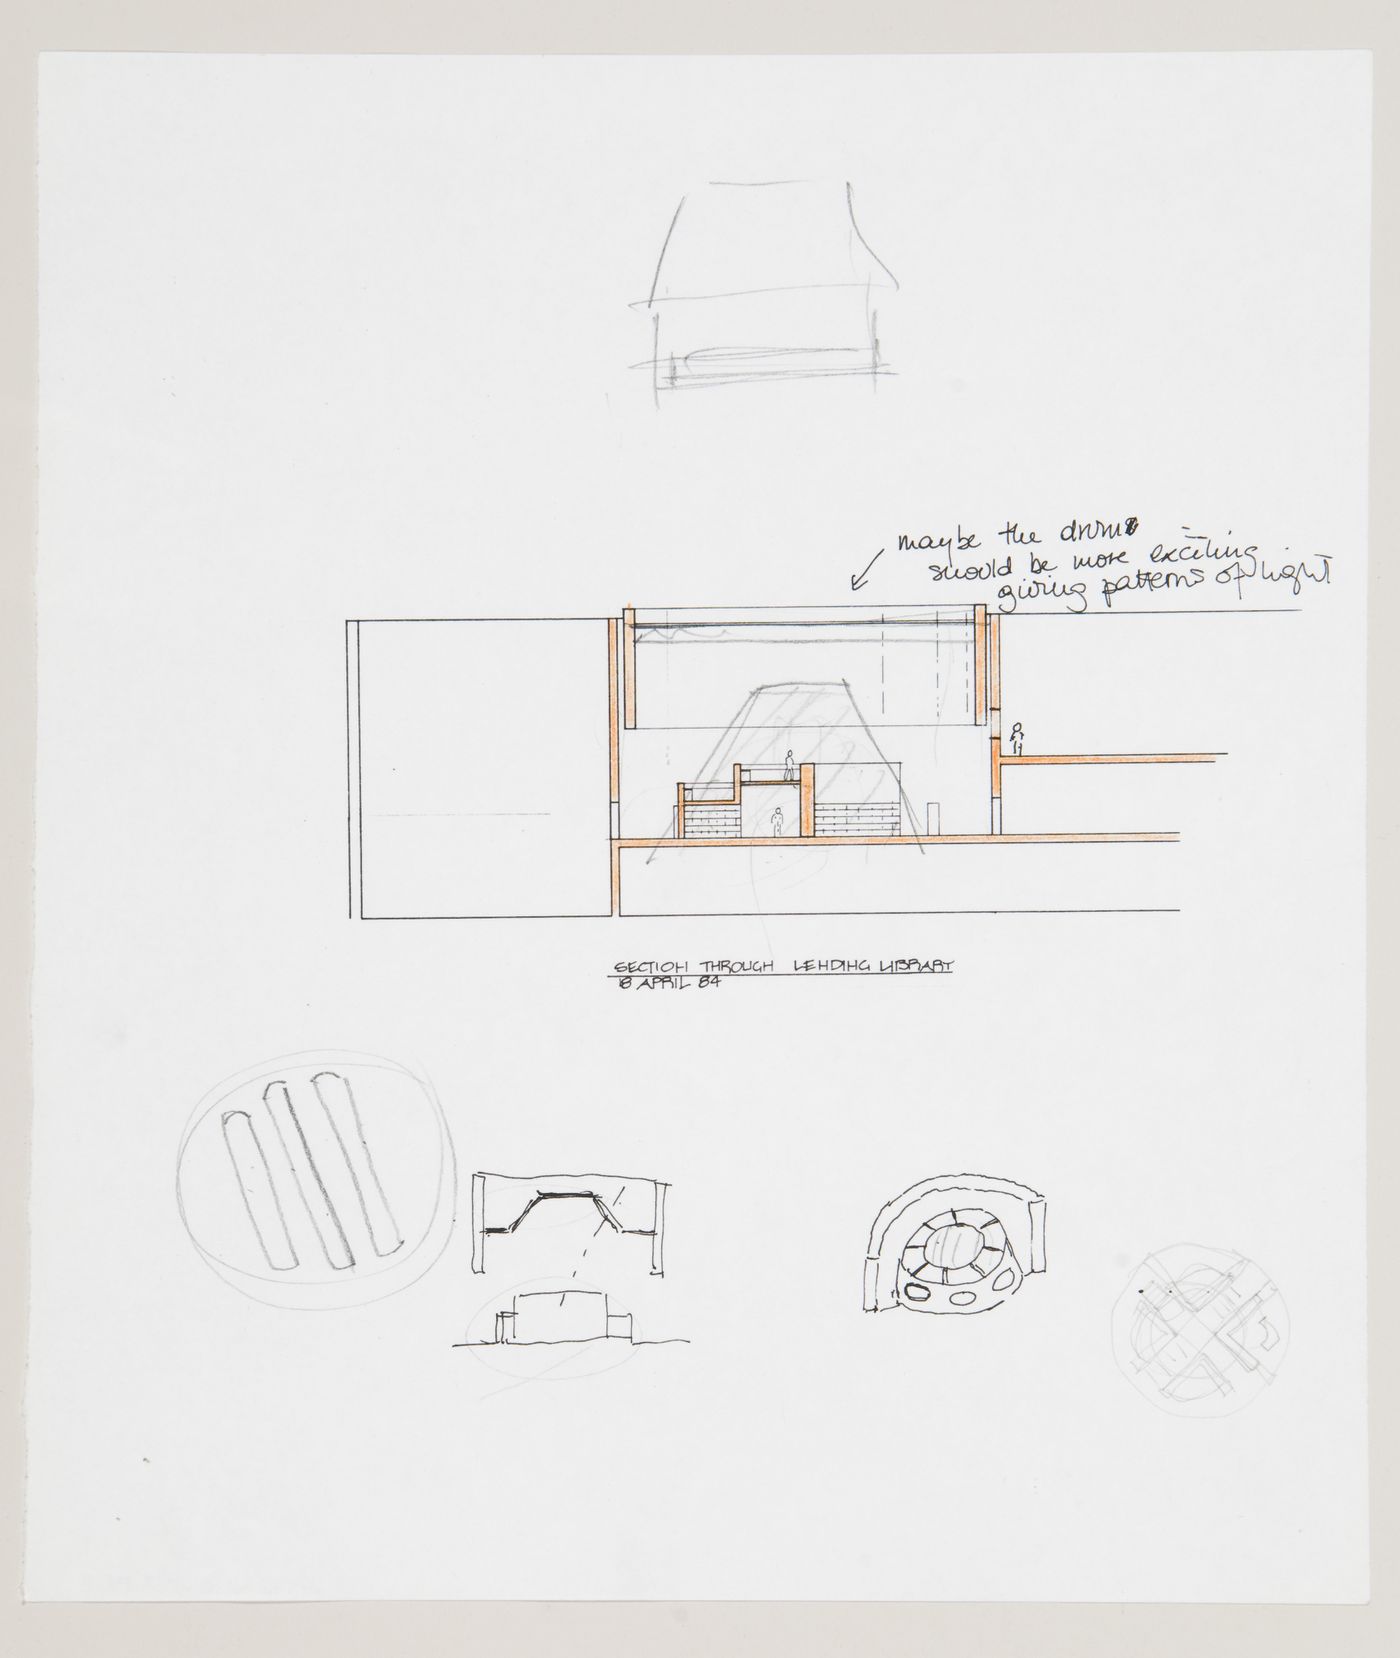 Biblioteca pubblica, Latina, Italy: section and sketches